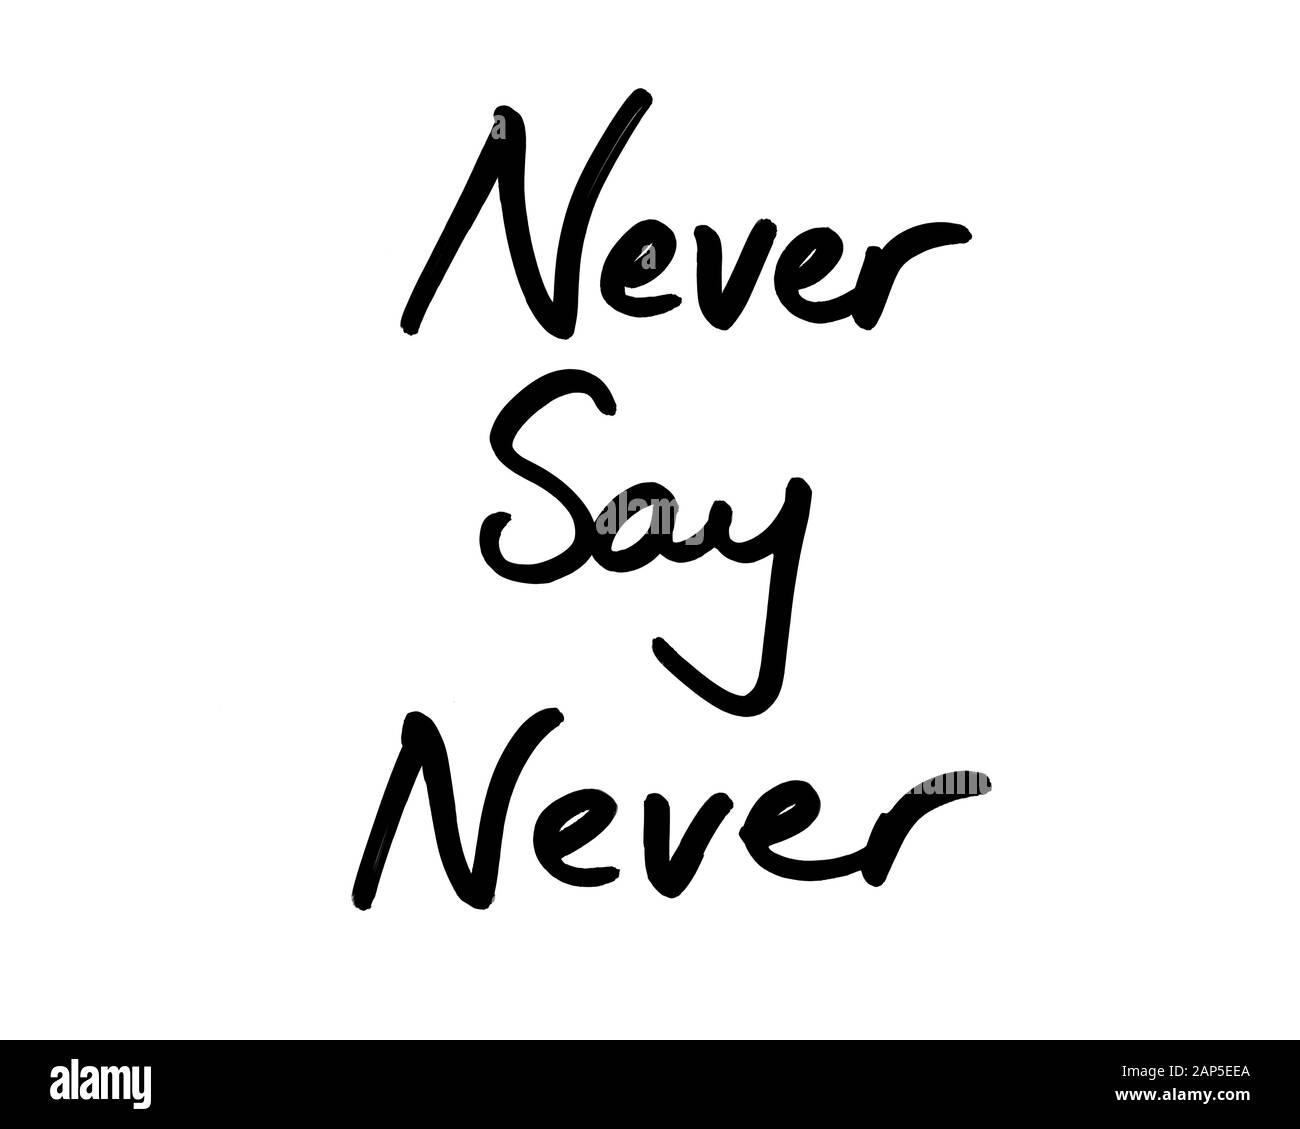 Never Say Never handwritten on a white background. Stock Photo